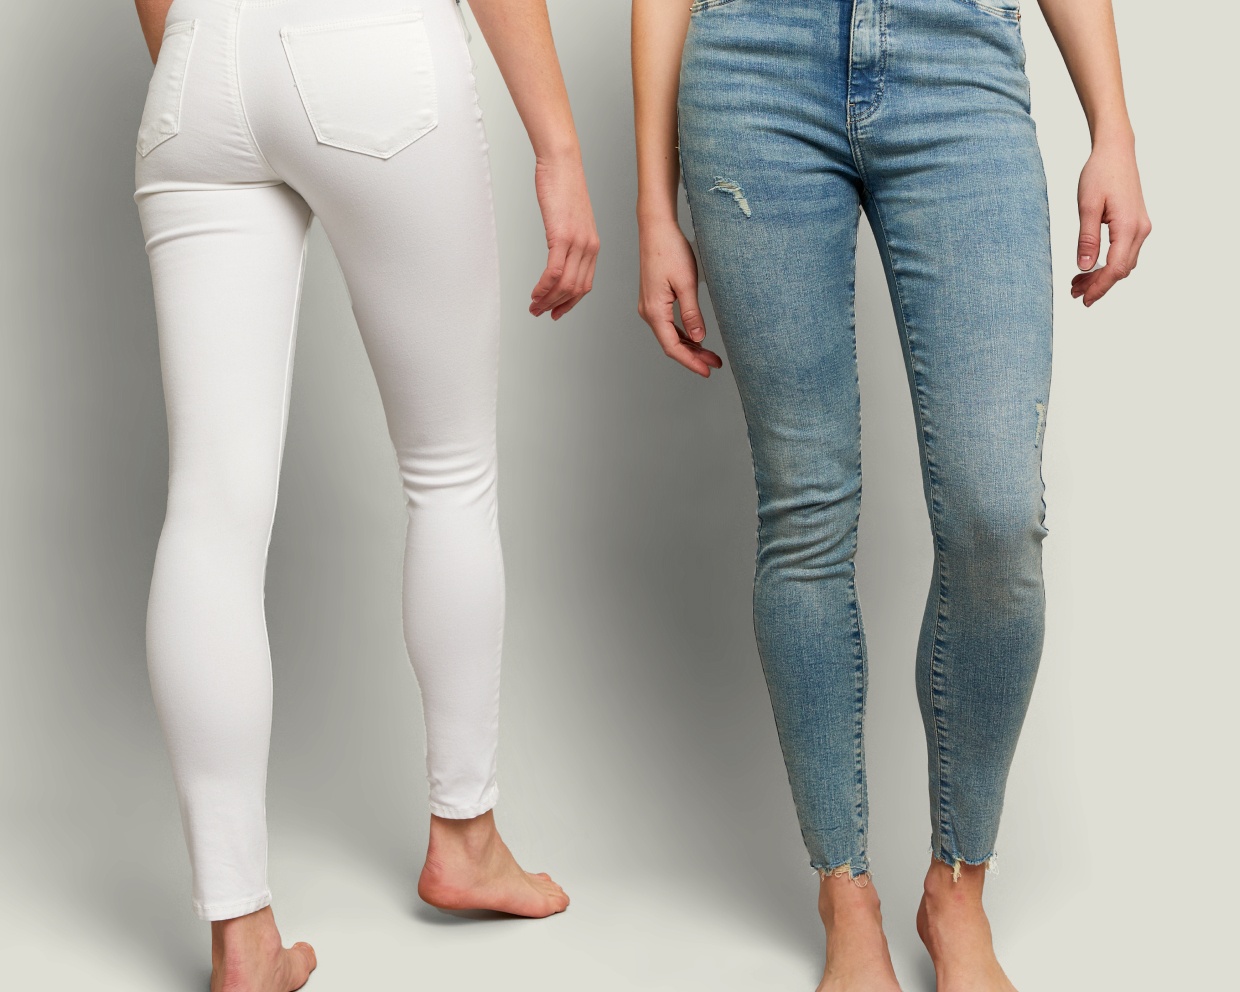 Ripped & Distressed Jeans for Women